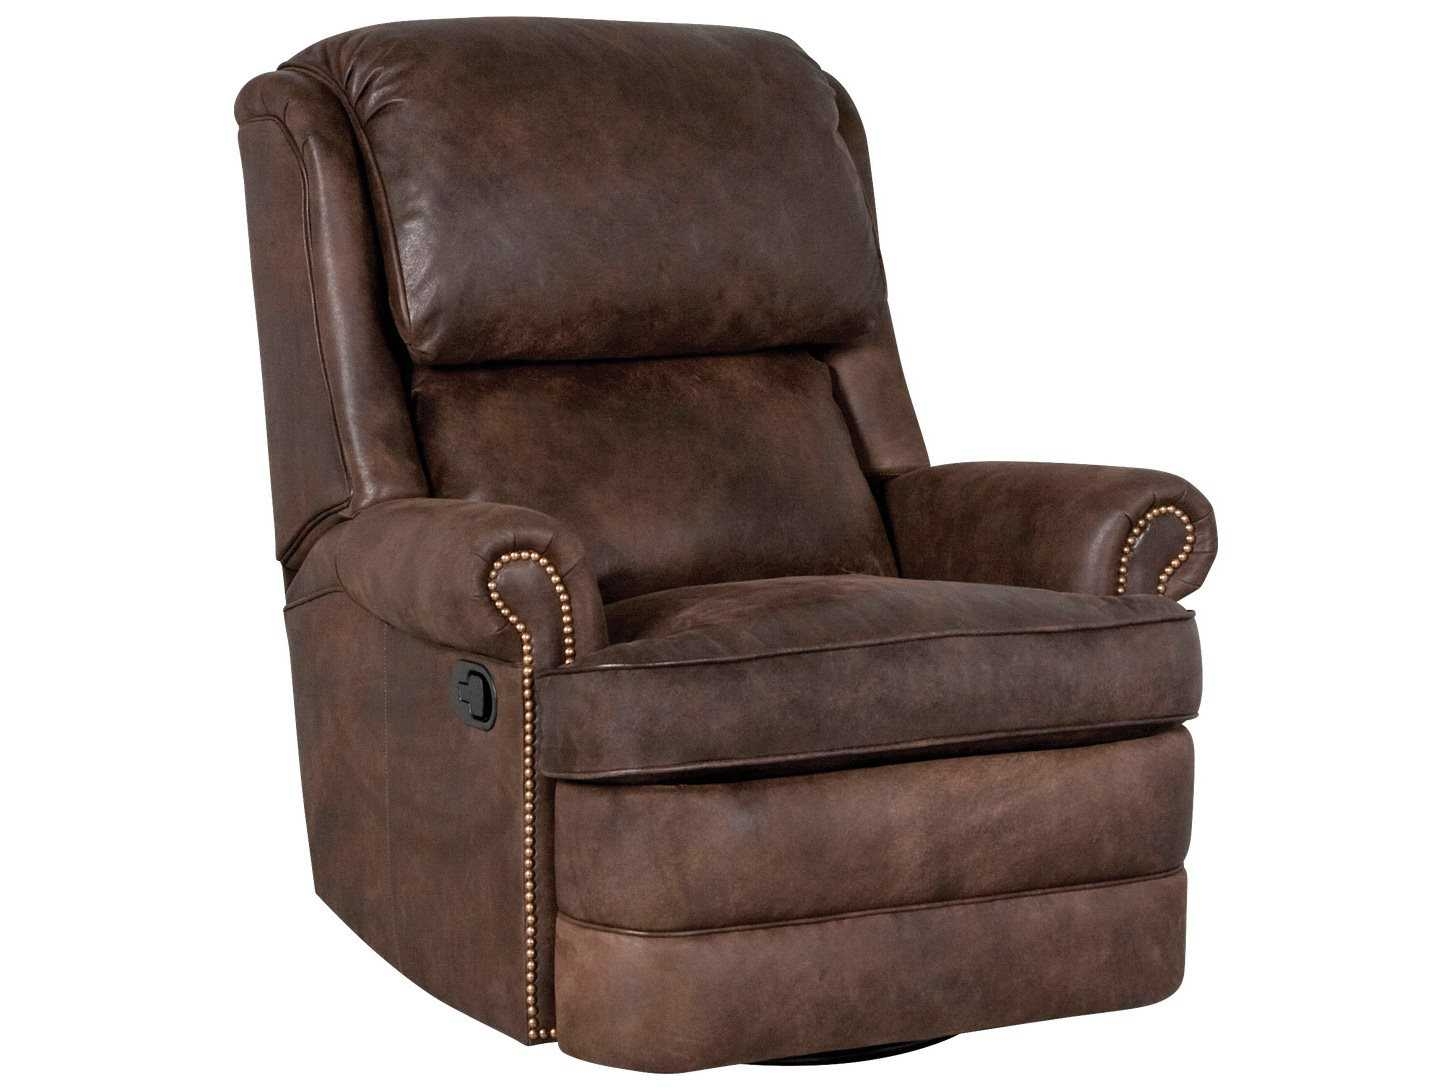 High back recliners 41